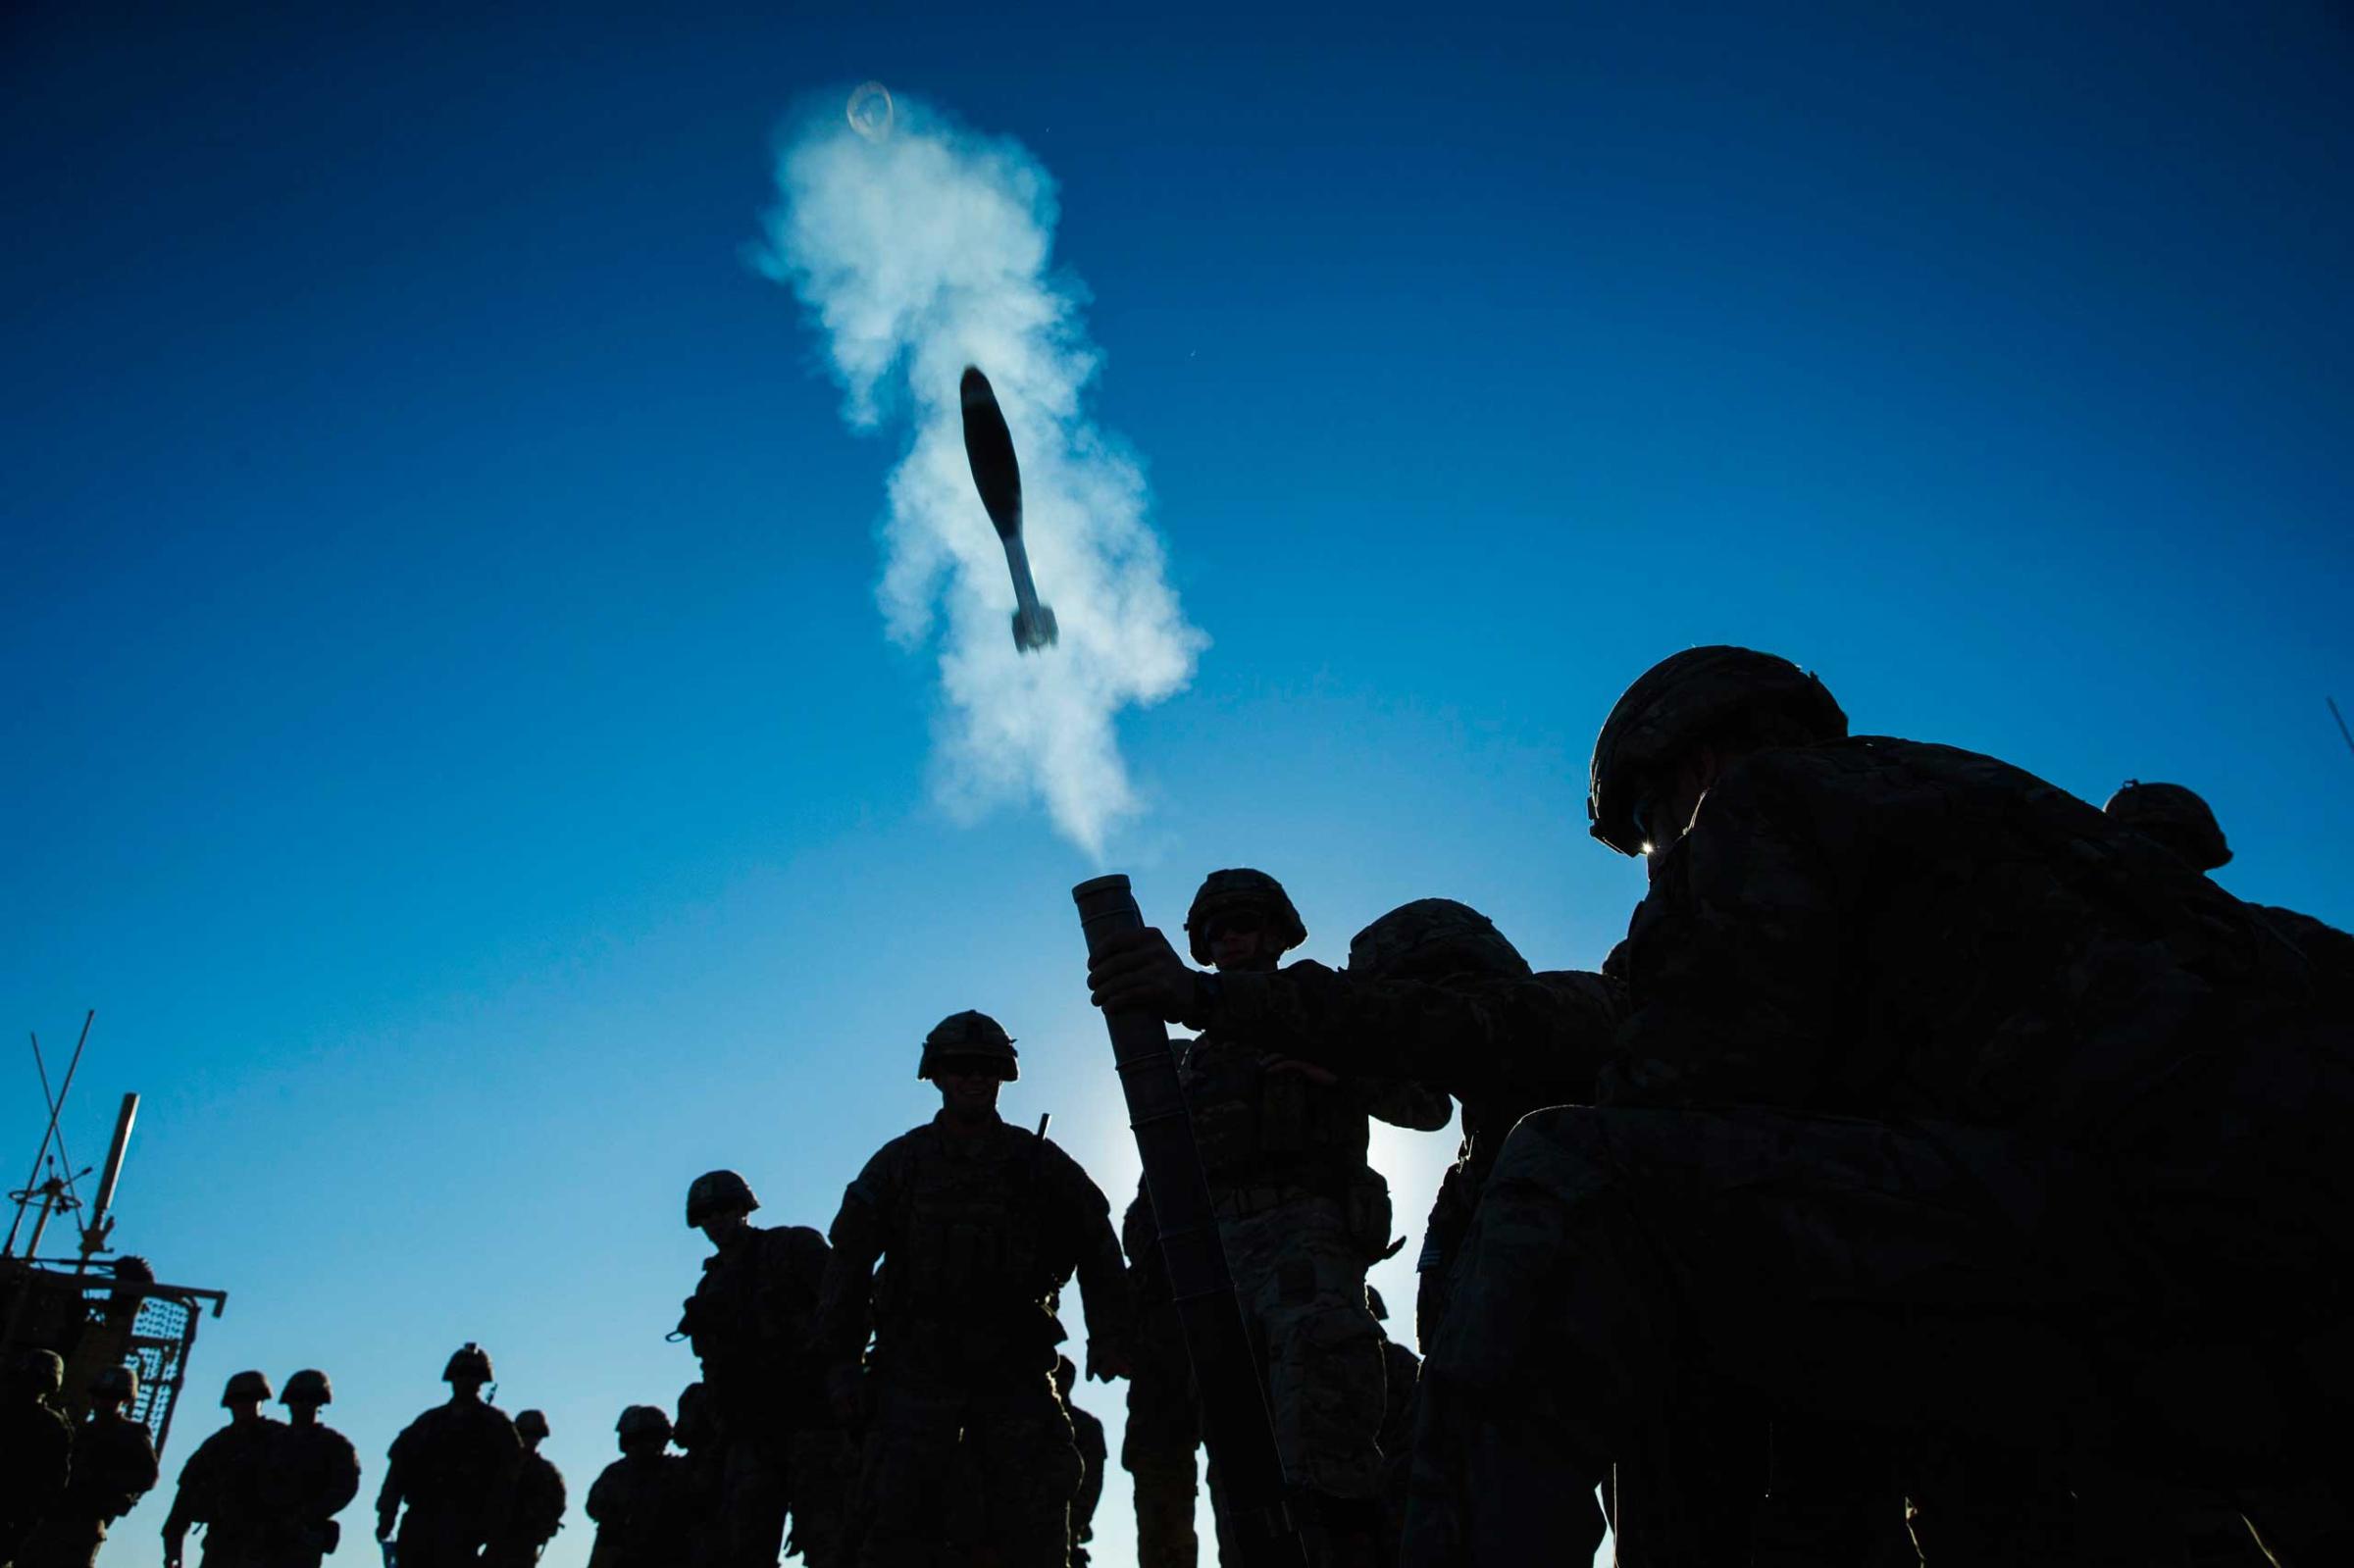 A mortar flies out of a tube during a mortar exercise for U.S. soldiers in Dragon Company of the 3rd Cavalry Regiment near forward operating base Gamberi in the Laghman province of Afghanistan